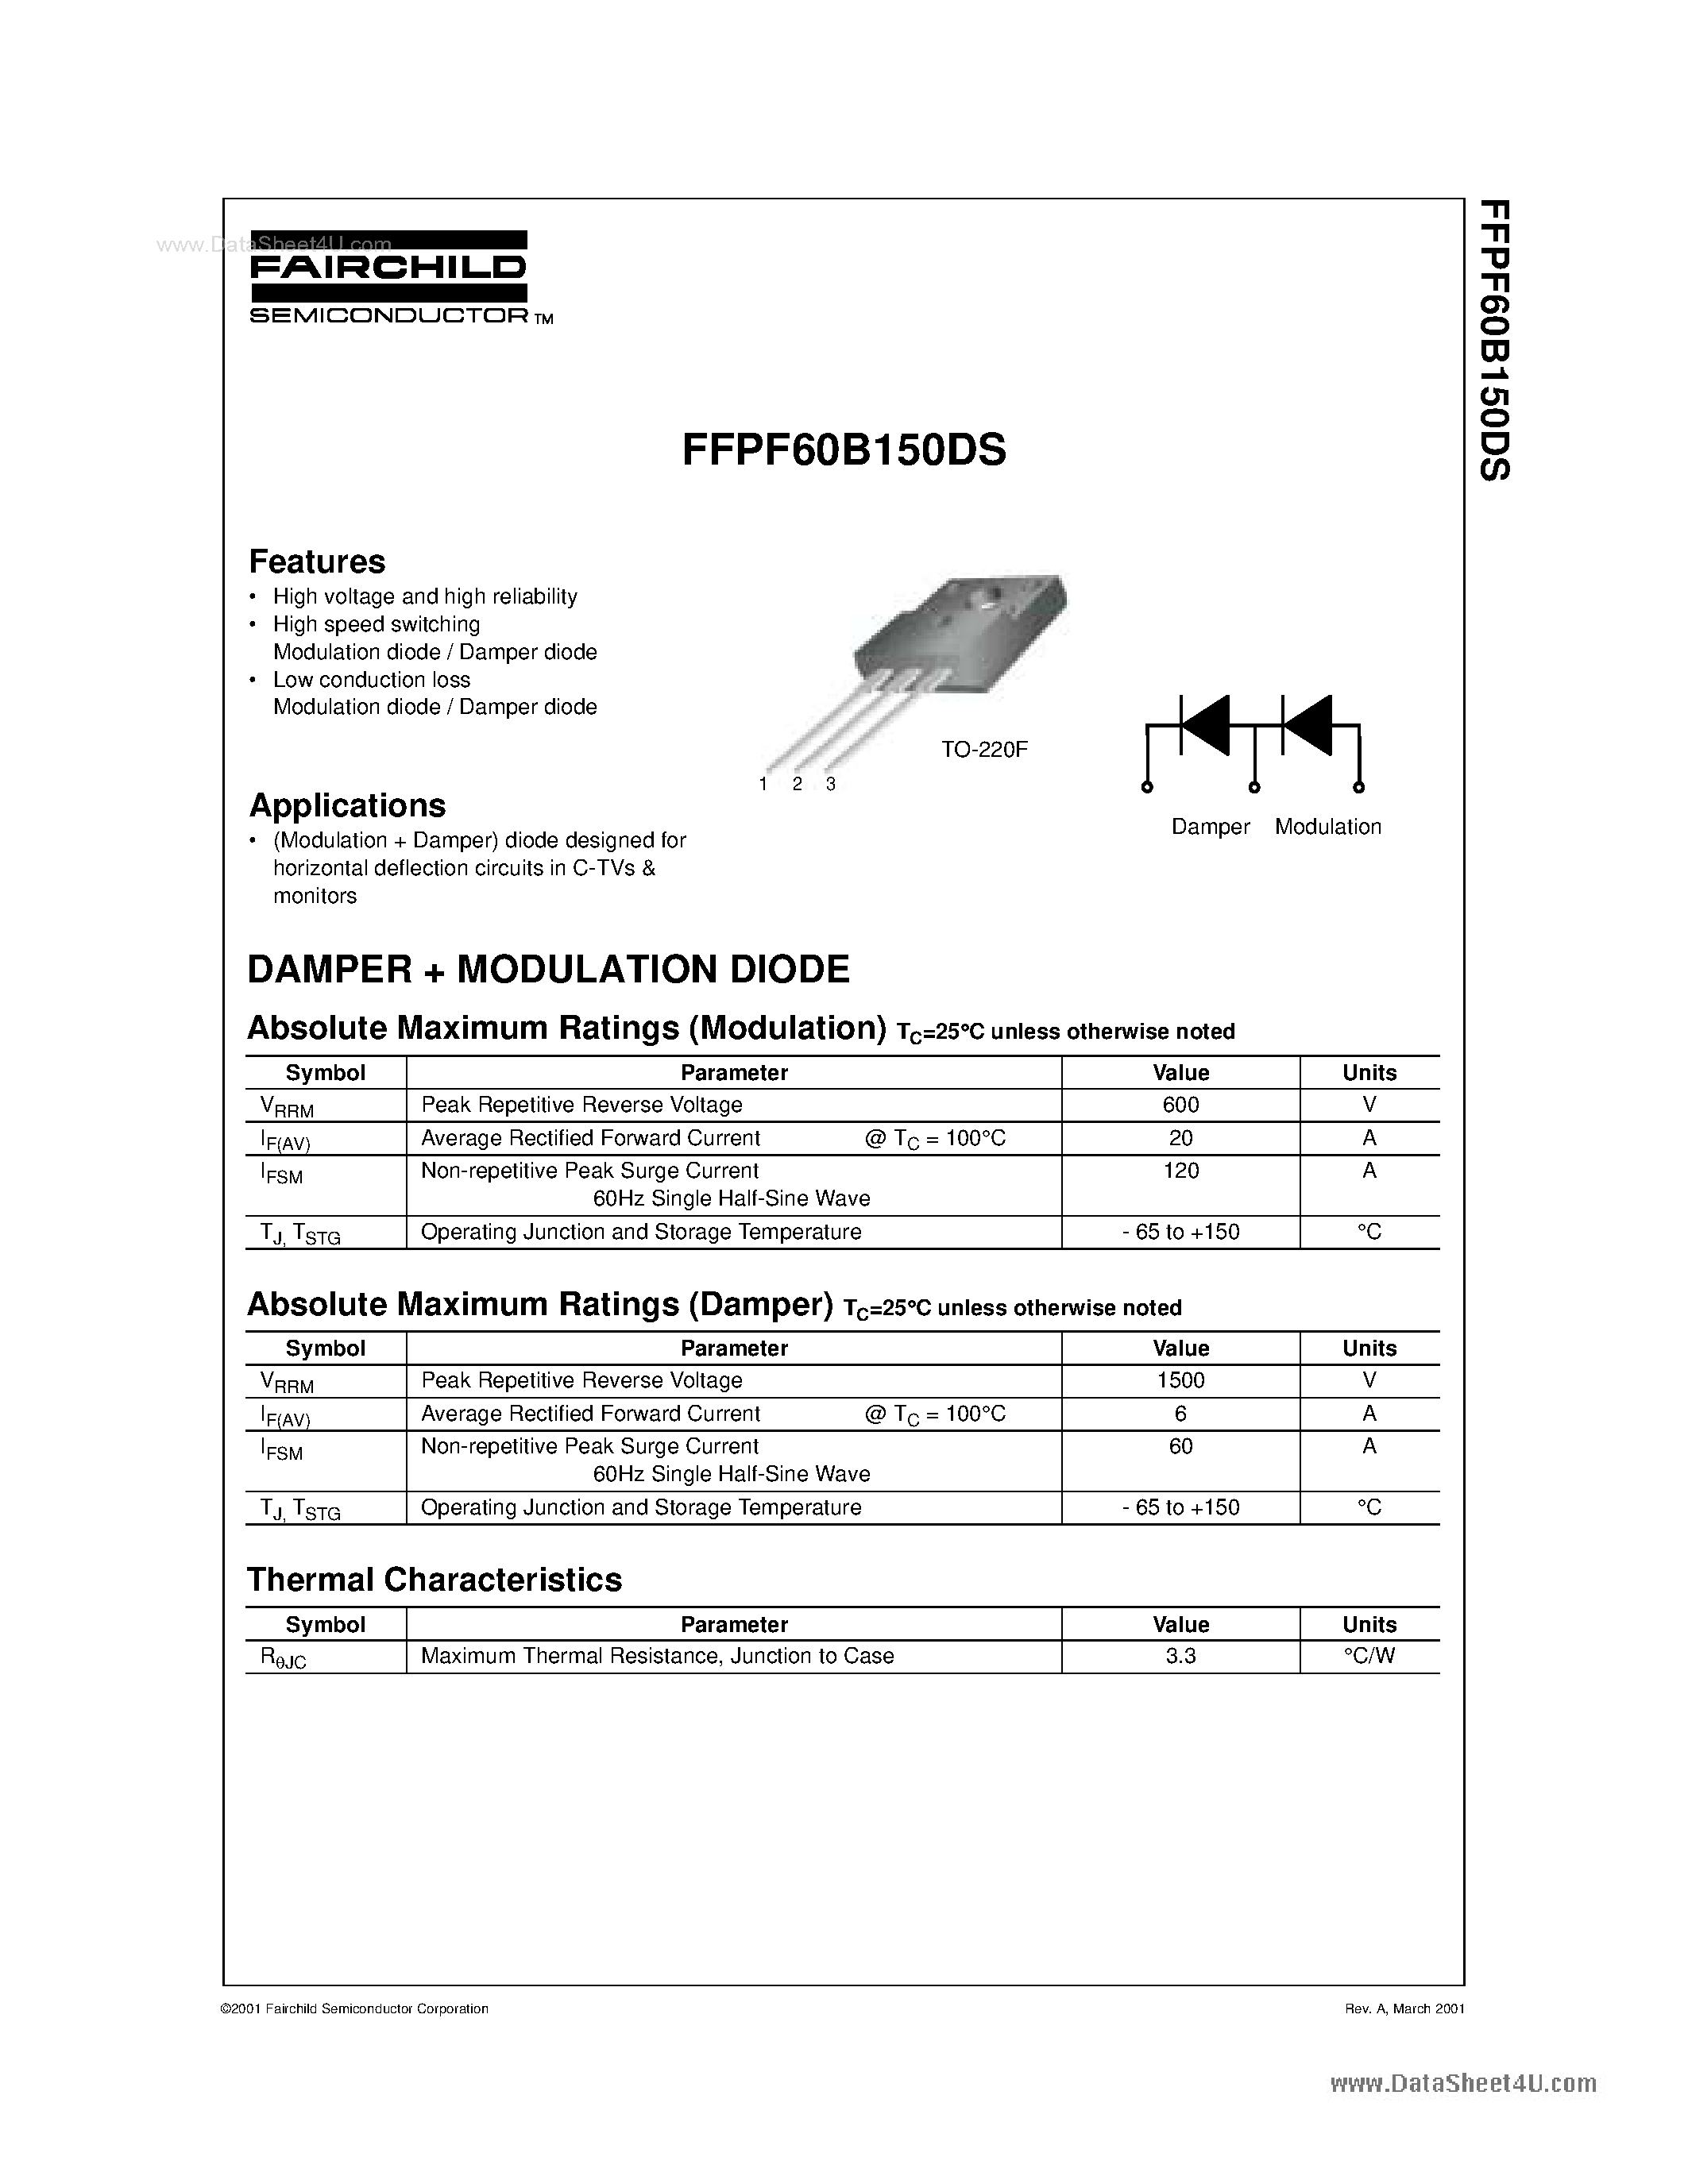 Datasheet F60B150DS - Search -----> FFPF60B150DS page 1